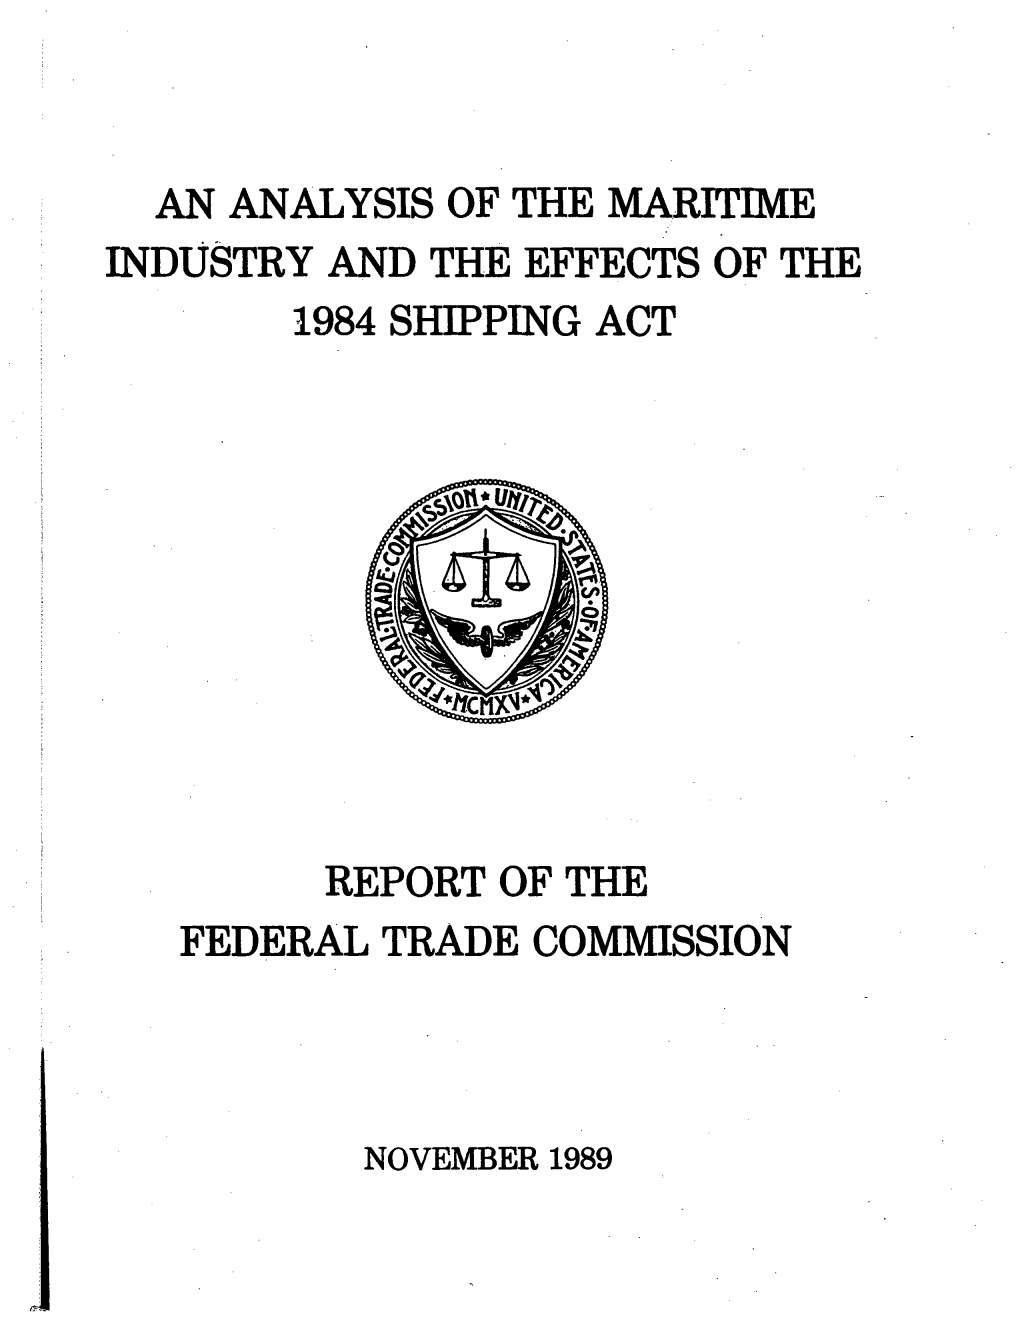 An Analysis of the Maritime Industry and 1984 Shipping Act, Timothy P